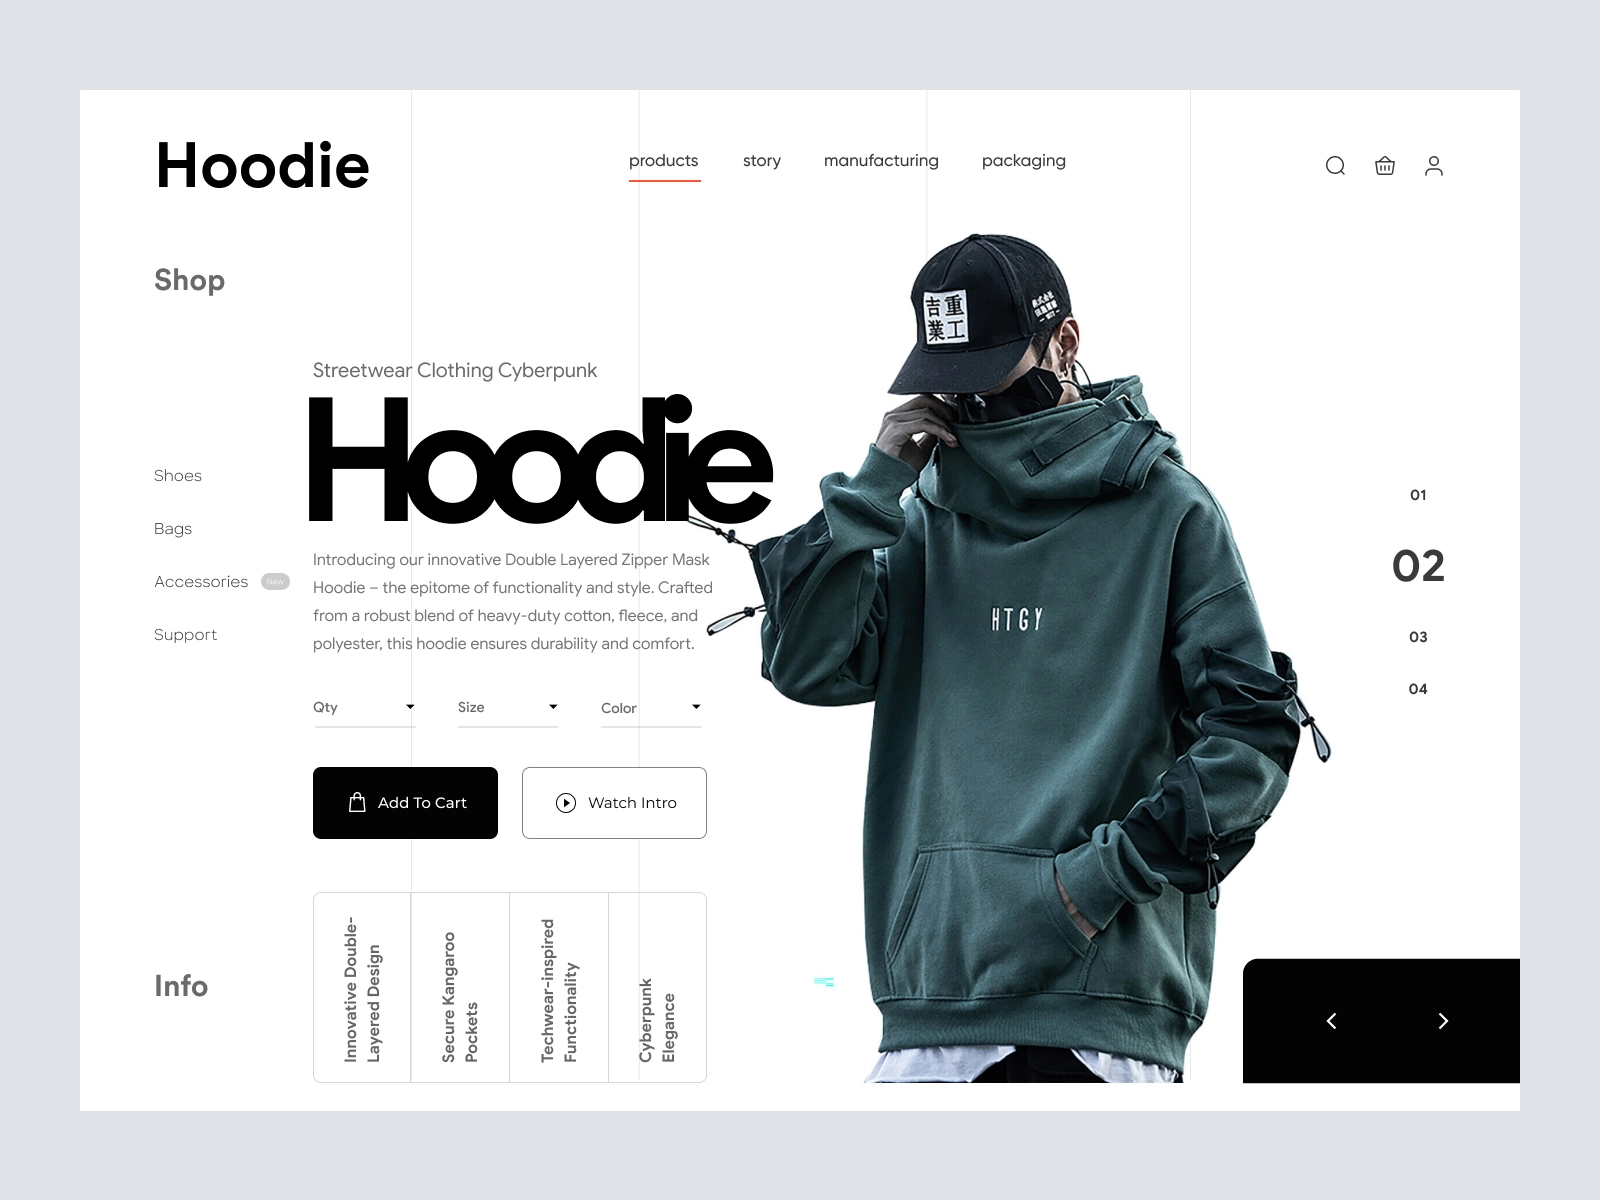 Shopify Website Homepage Design For Fashion Products for Adobe XD - screen 1